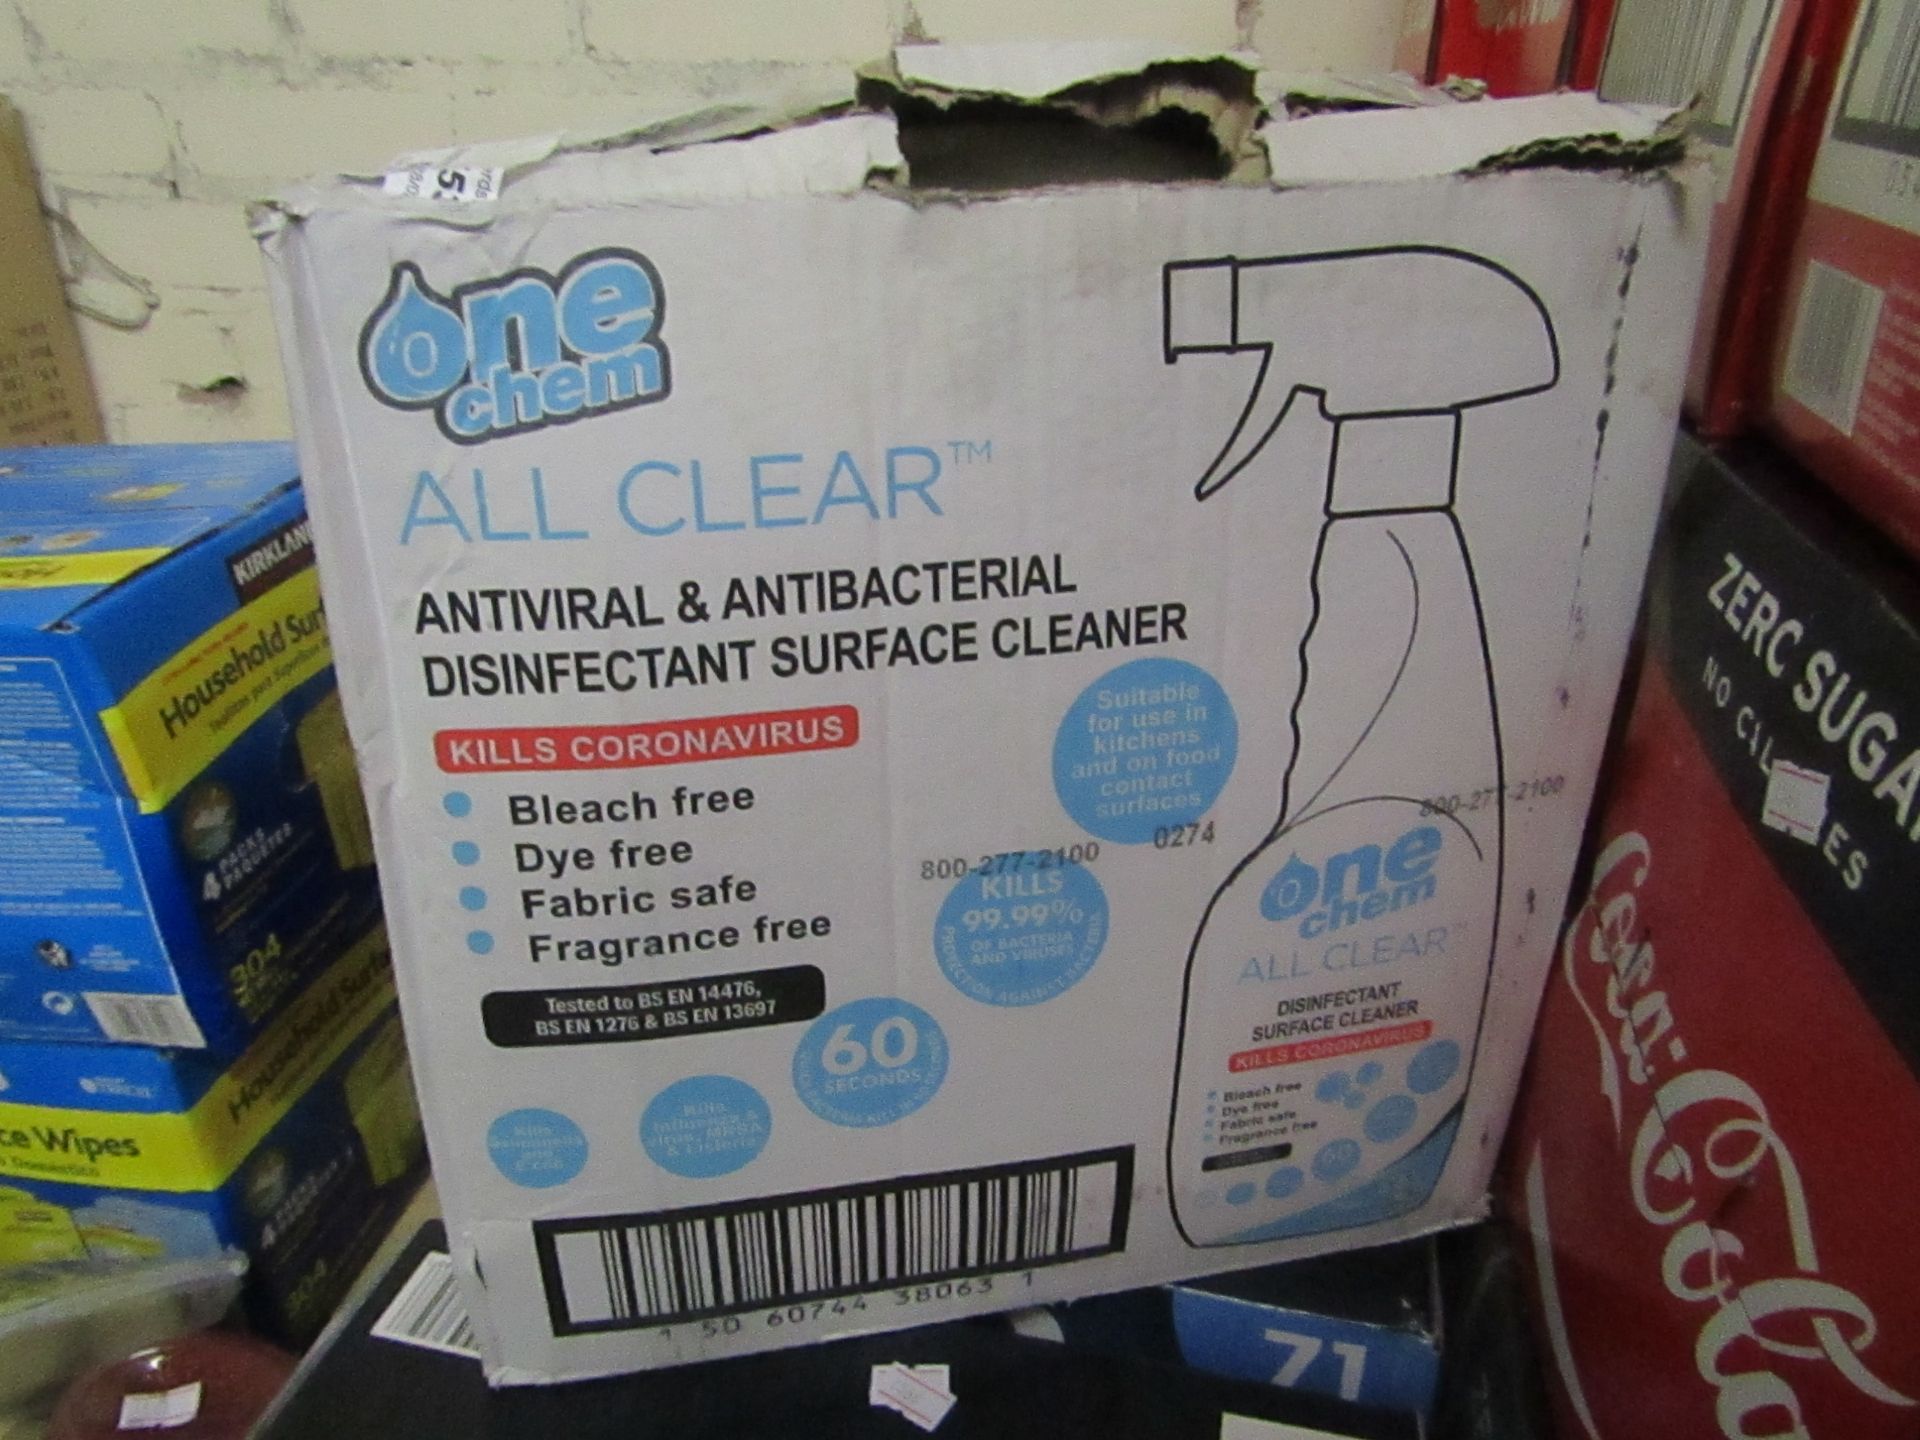 One Chem Antiviral & Antibacterial Disenfectant Surface Cleaner (6x750ml) - Damage to Packaging